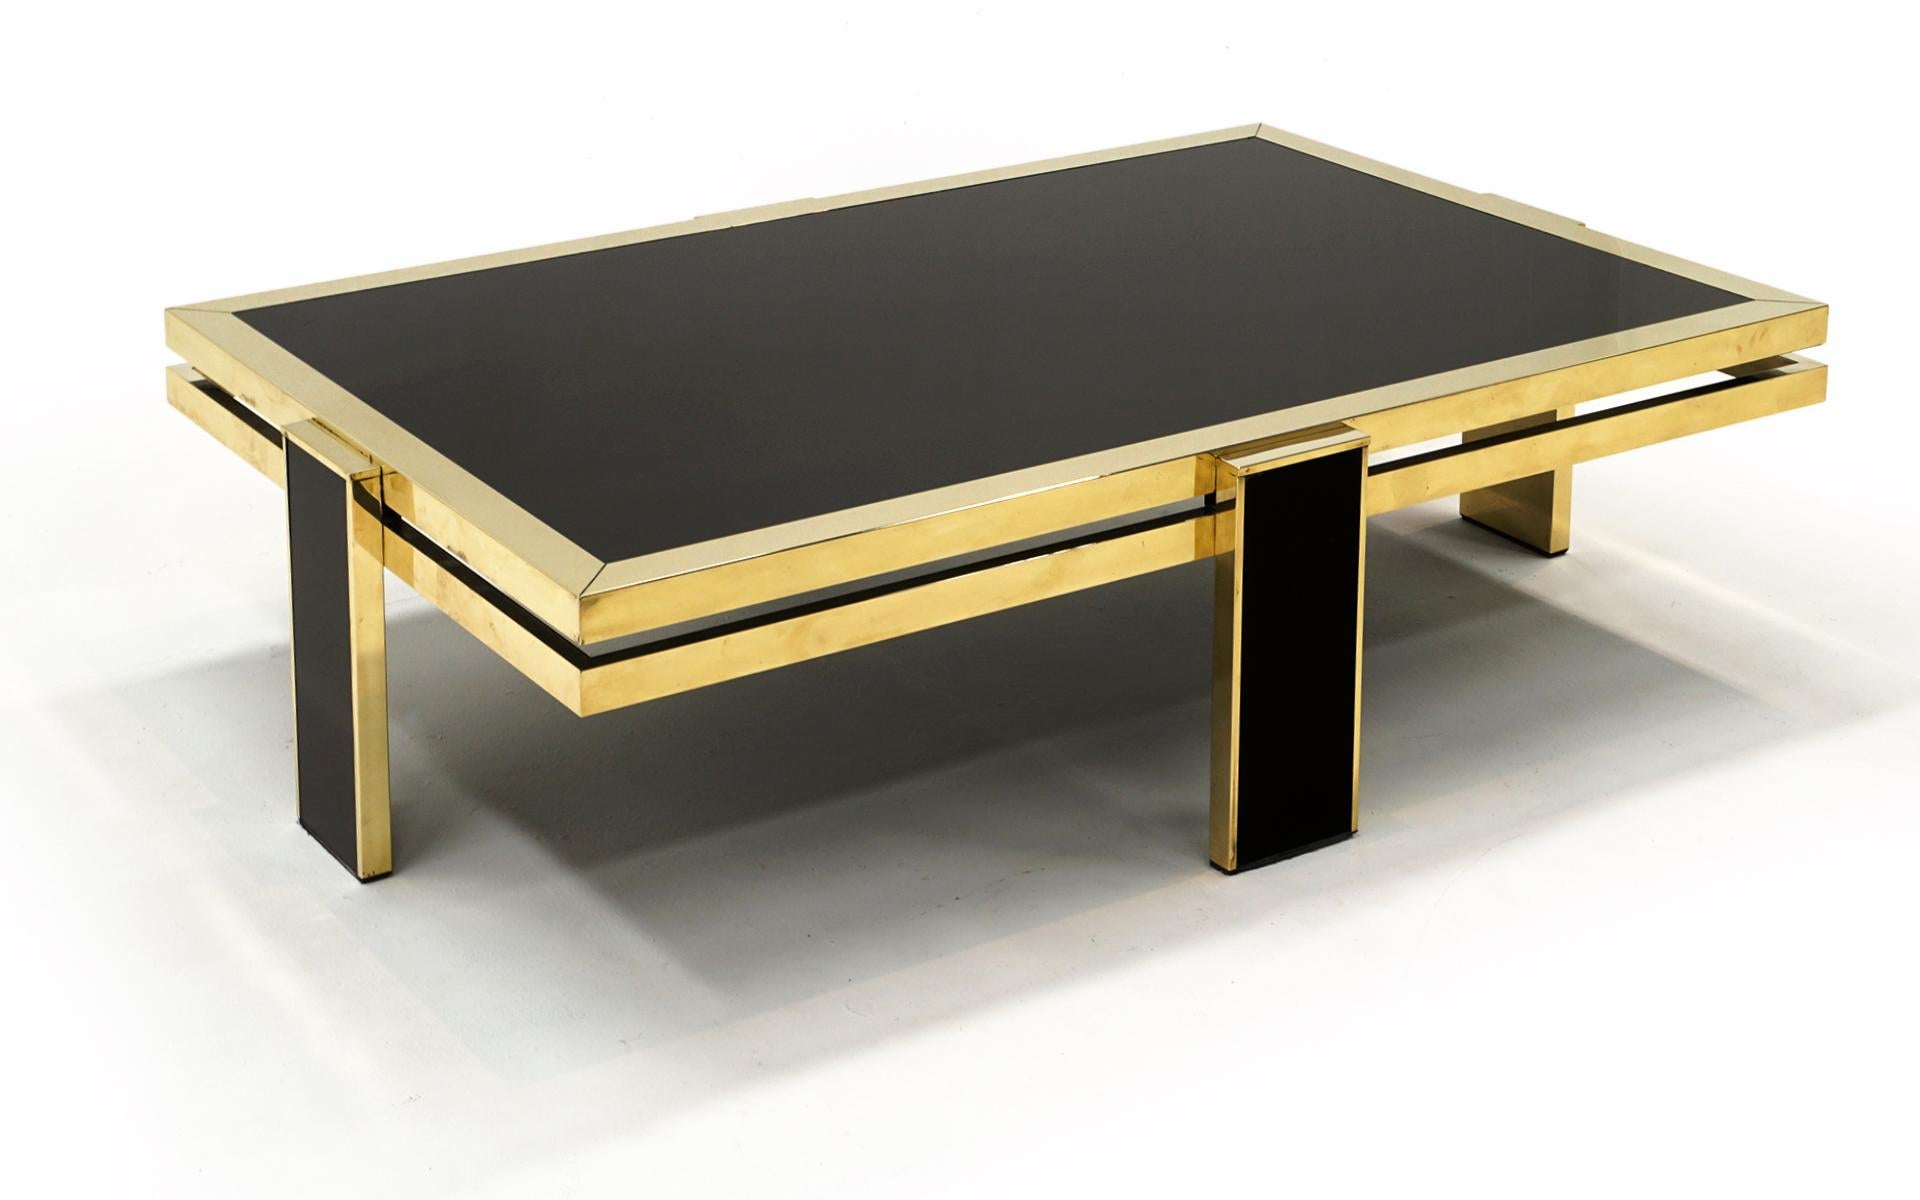 Hollywood Regency Brass and Colored Glass Coffee Table by Giacomo Sinopoli for Liwan's Rome 1970s  For Sale